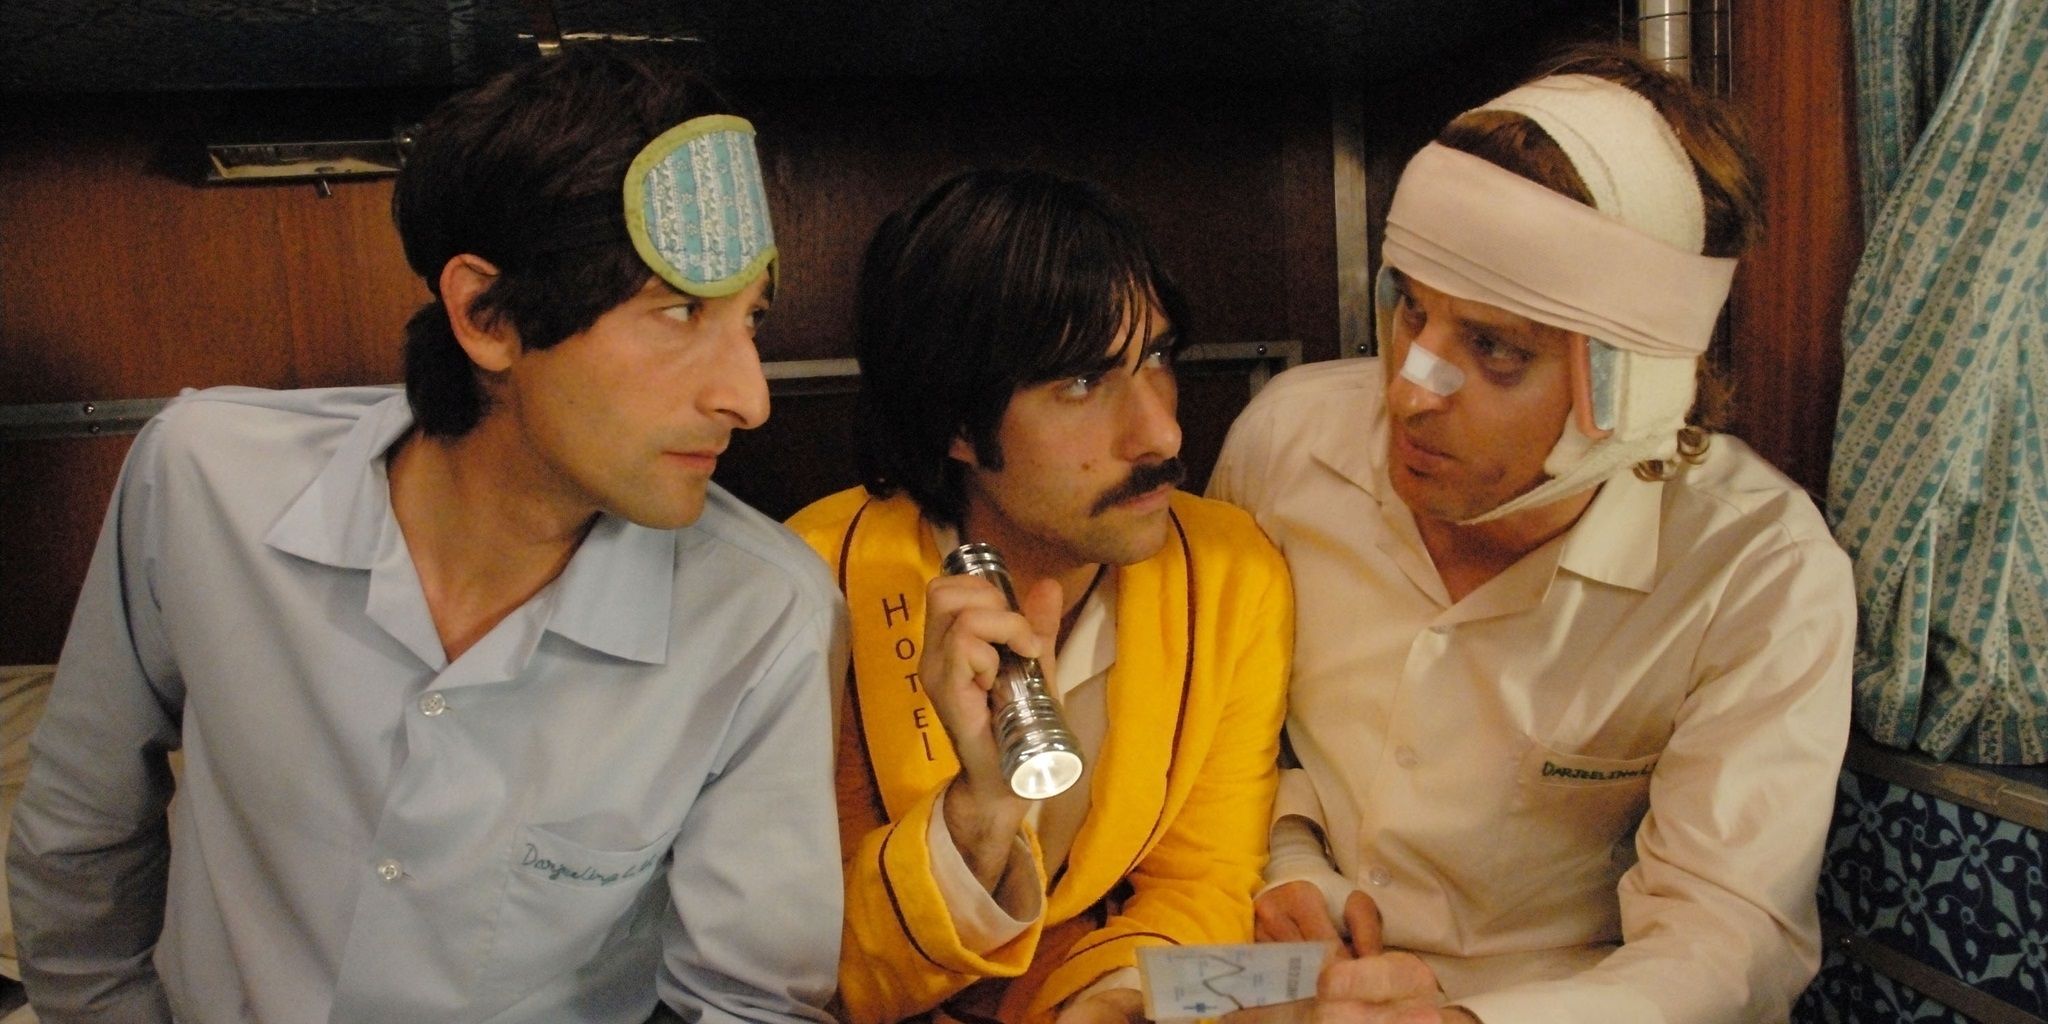 Peter, Jack, and Francis talking in The Darjeeling Limited